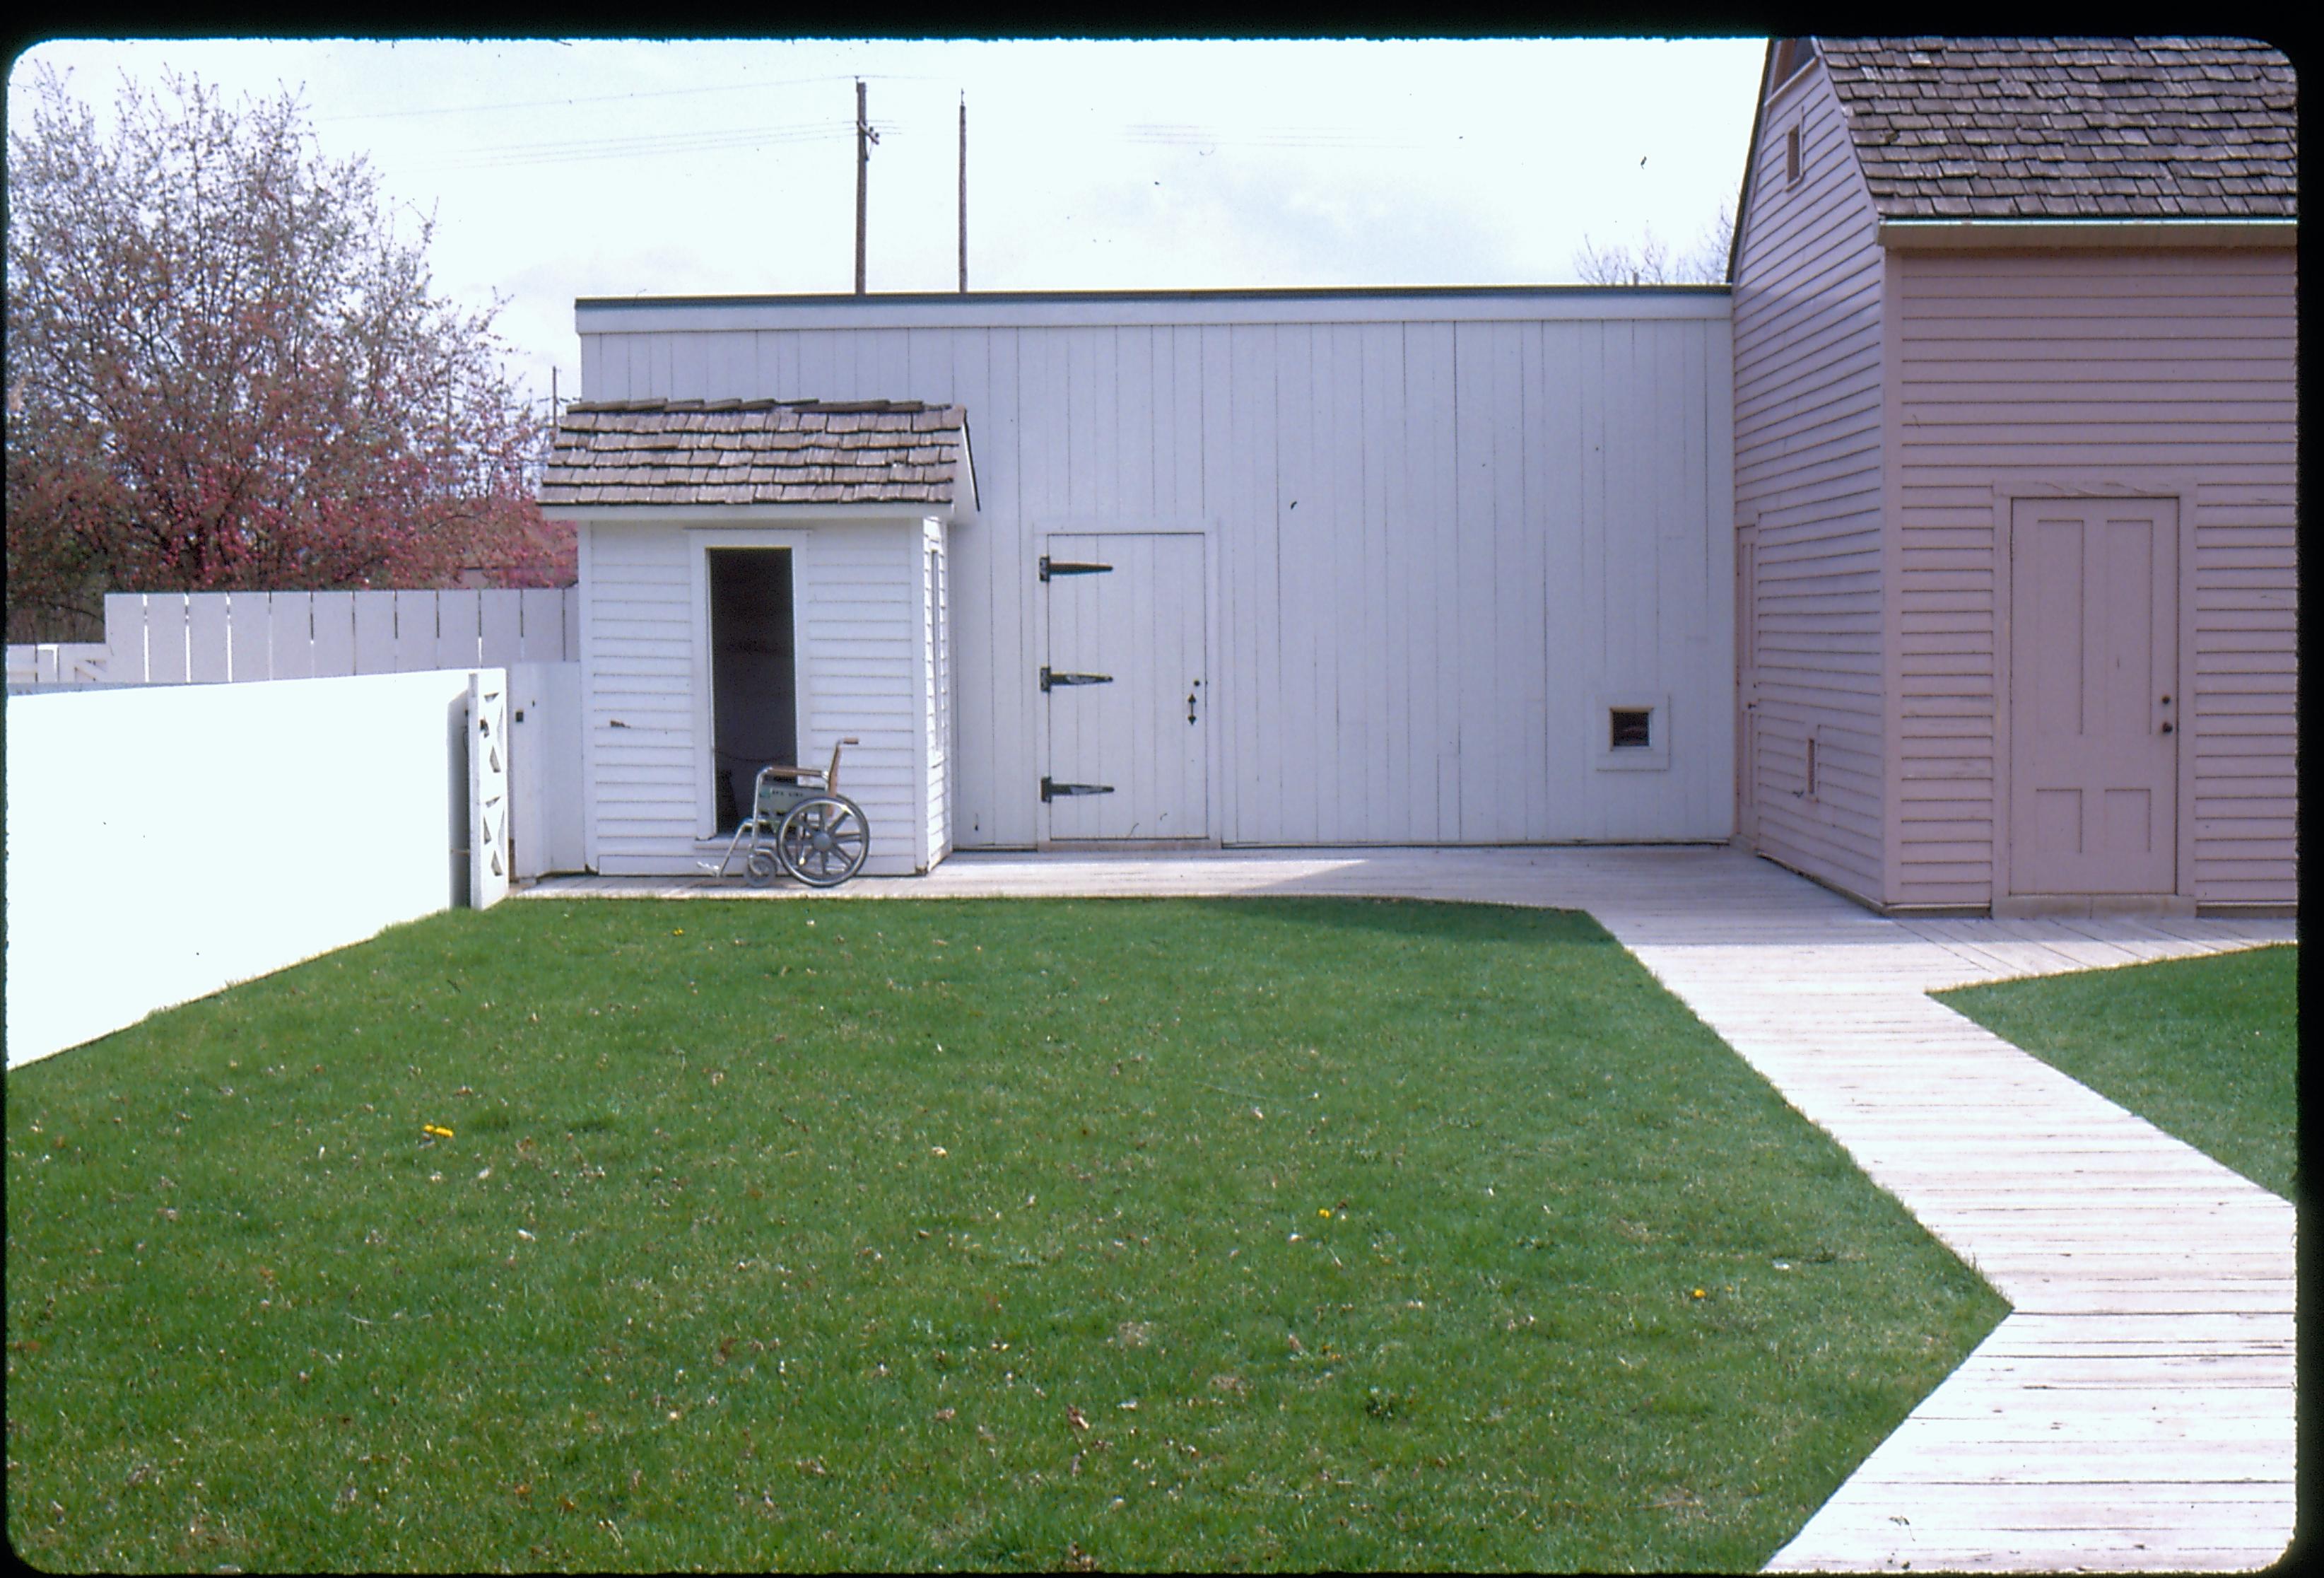 Back yard of the Lincoln Home, facing east. A wheelchair sits near the privy and north east access gate to the yard.